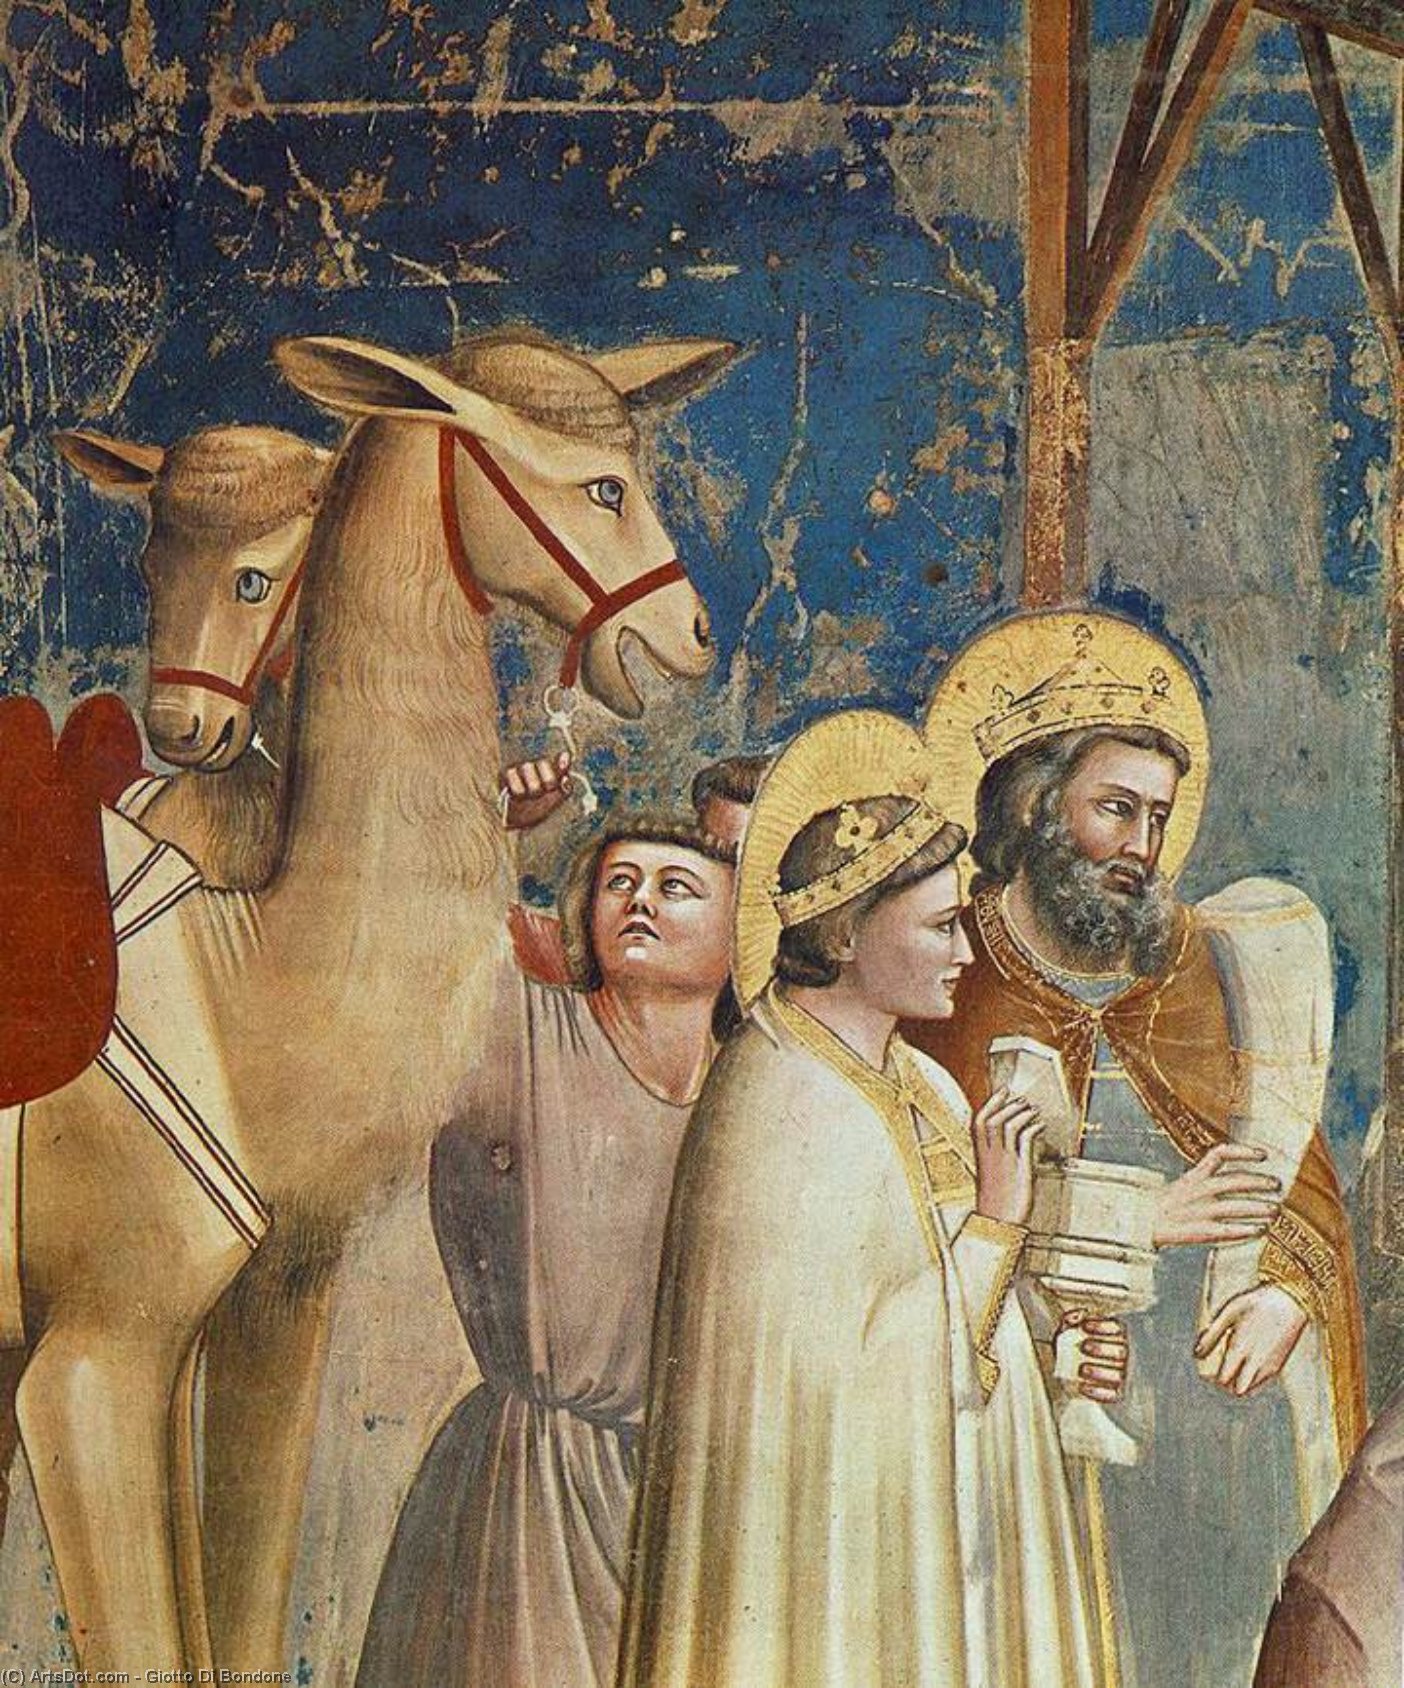 WikiOO.org - 백과 사전 - 회화, 삽화 Giotto Di Bondone - No. 18 Scenes from the Life of Christ: 2. Adoration of the Magi (detail)